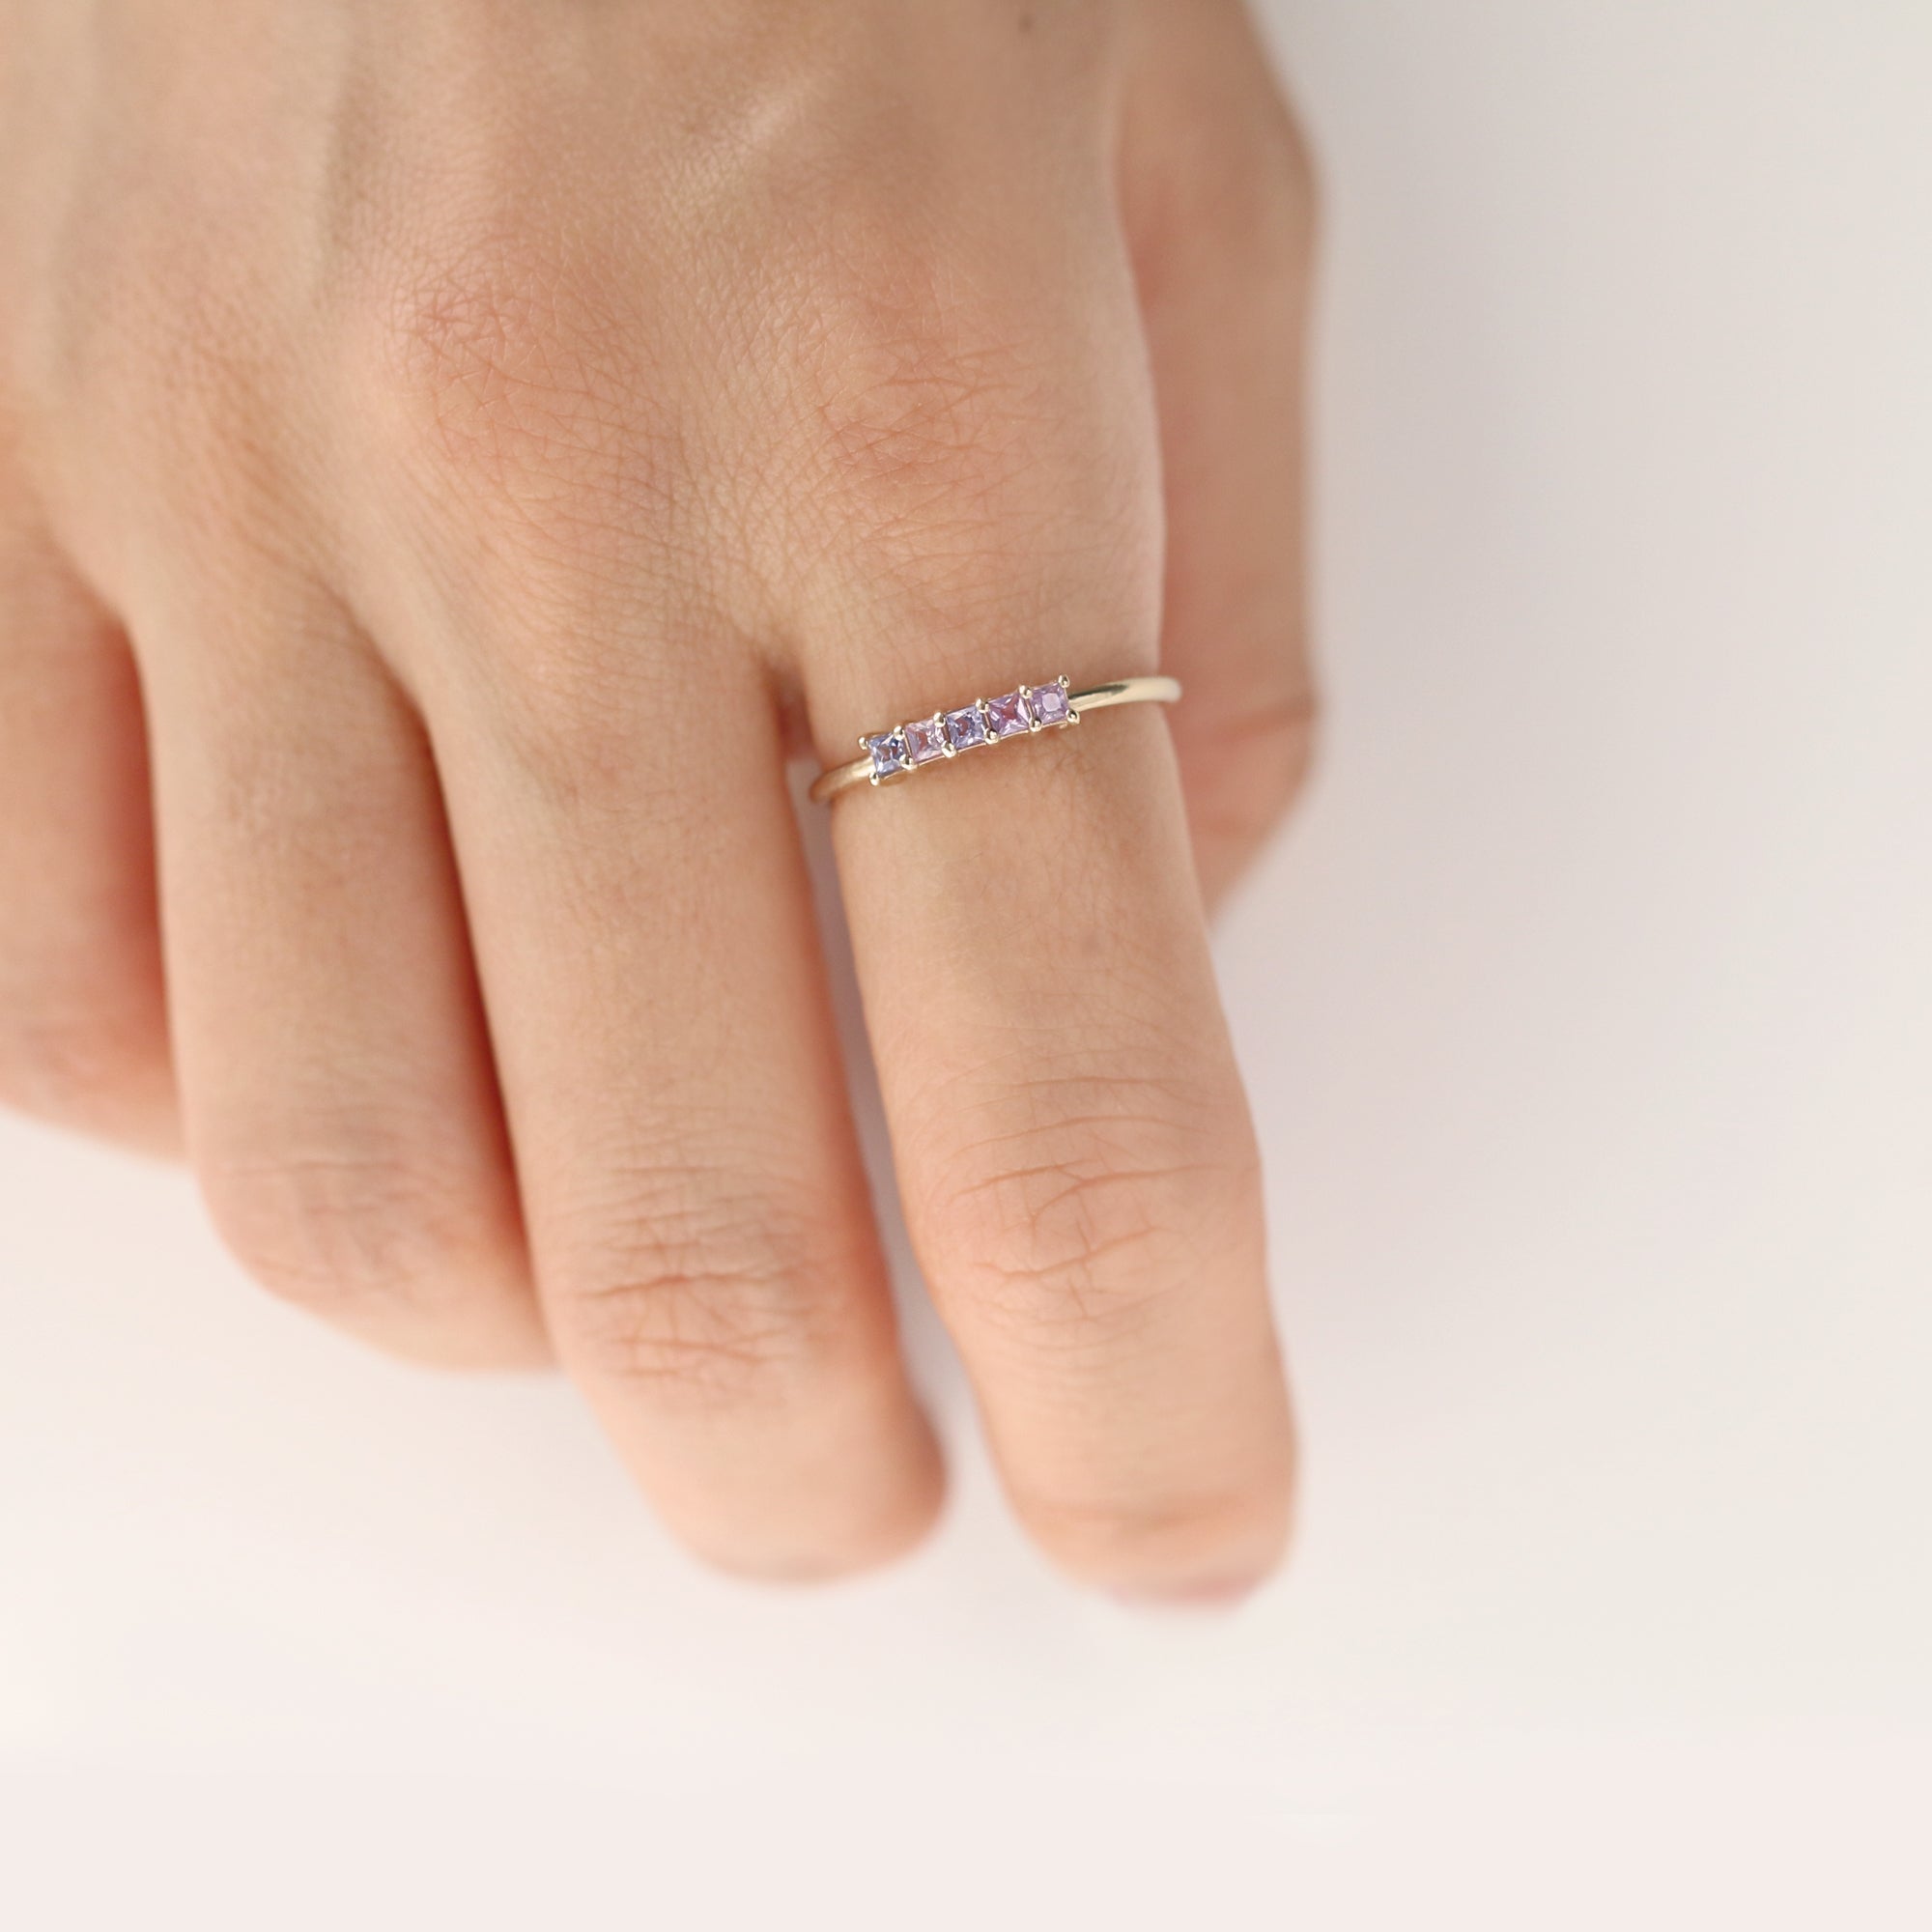 Five Lavender Sapphire Ring by Jamie Park Jewelry